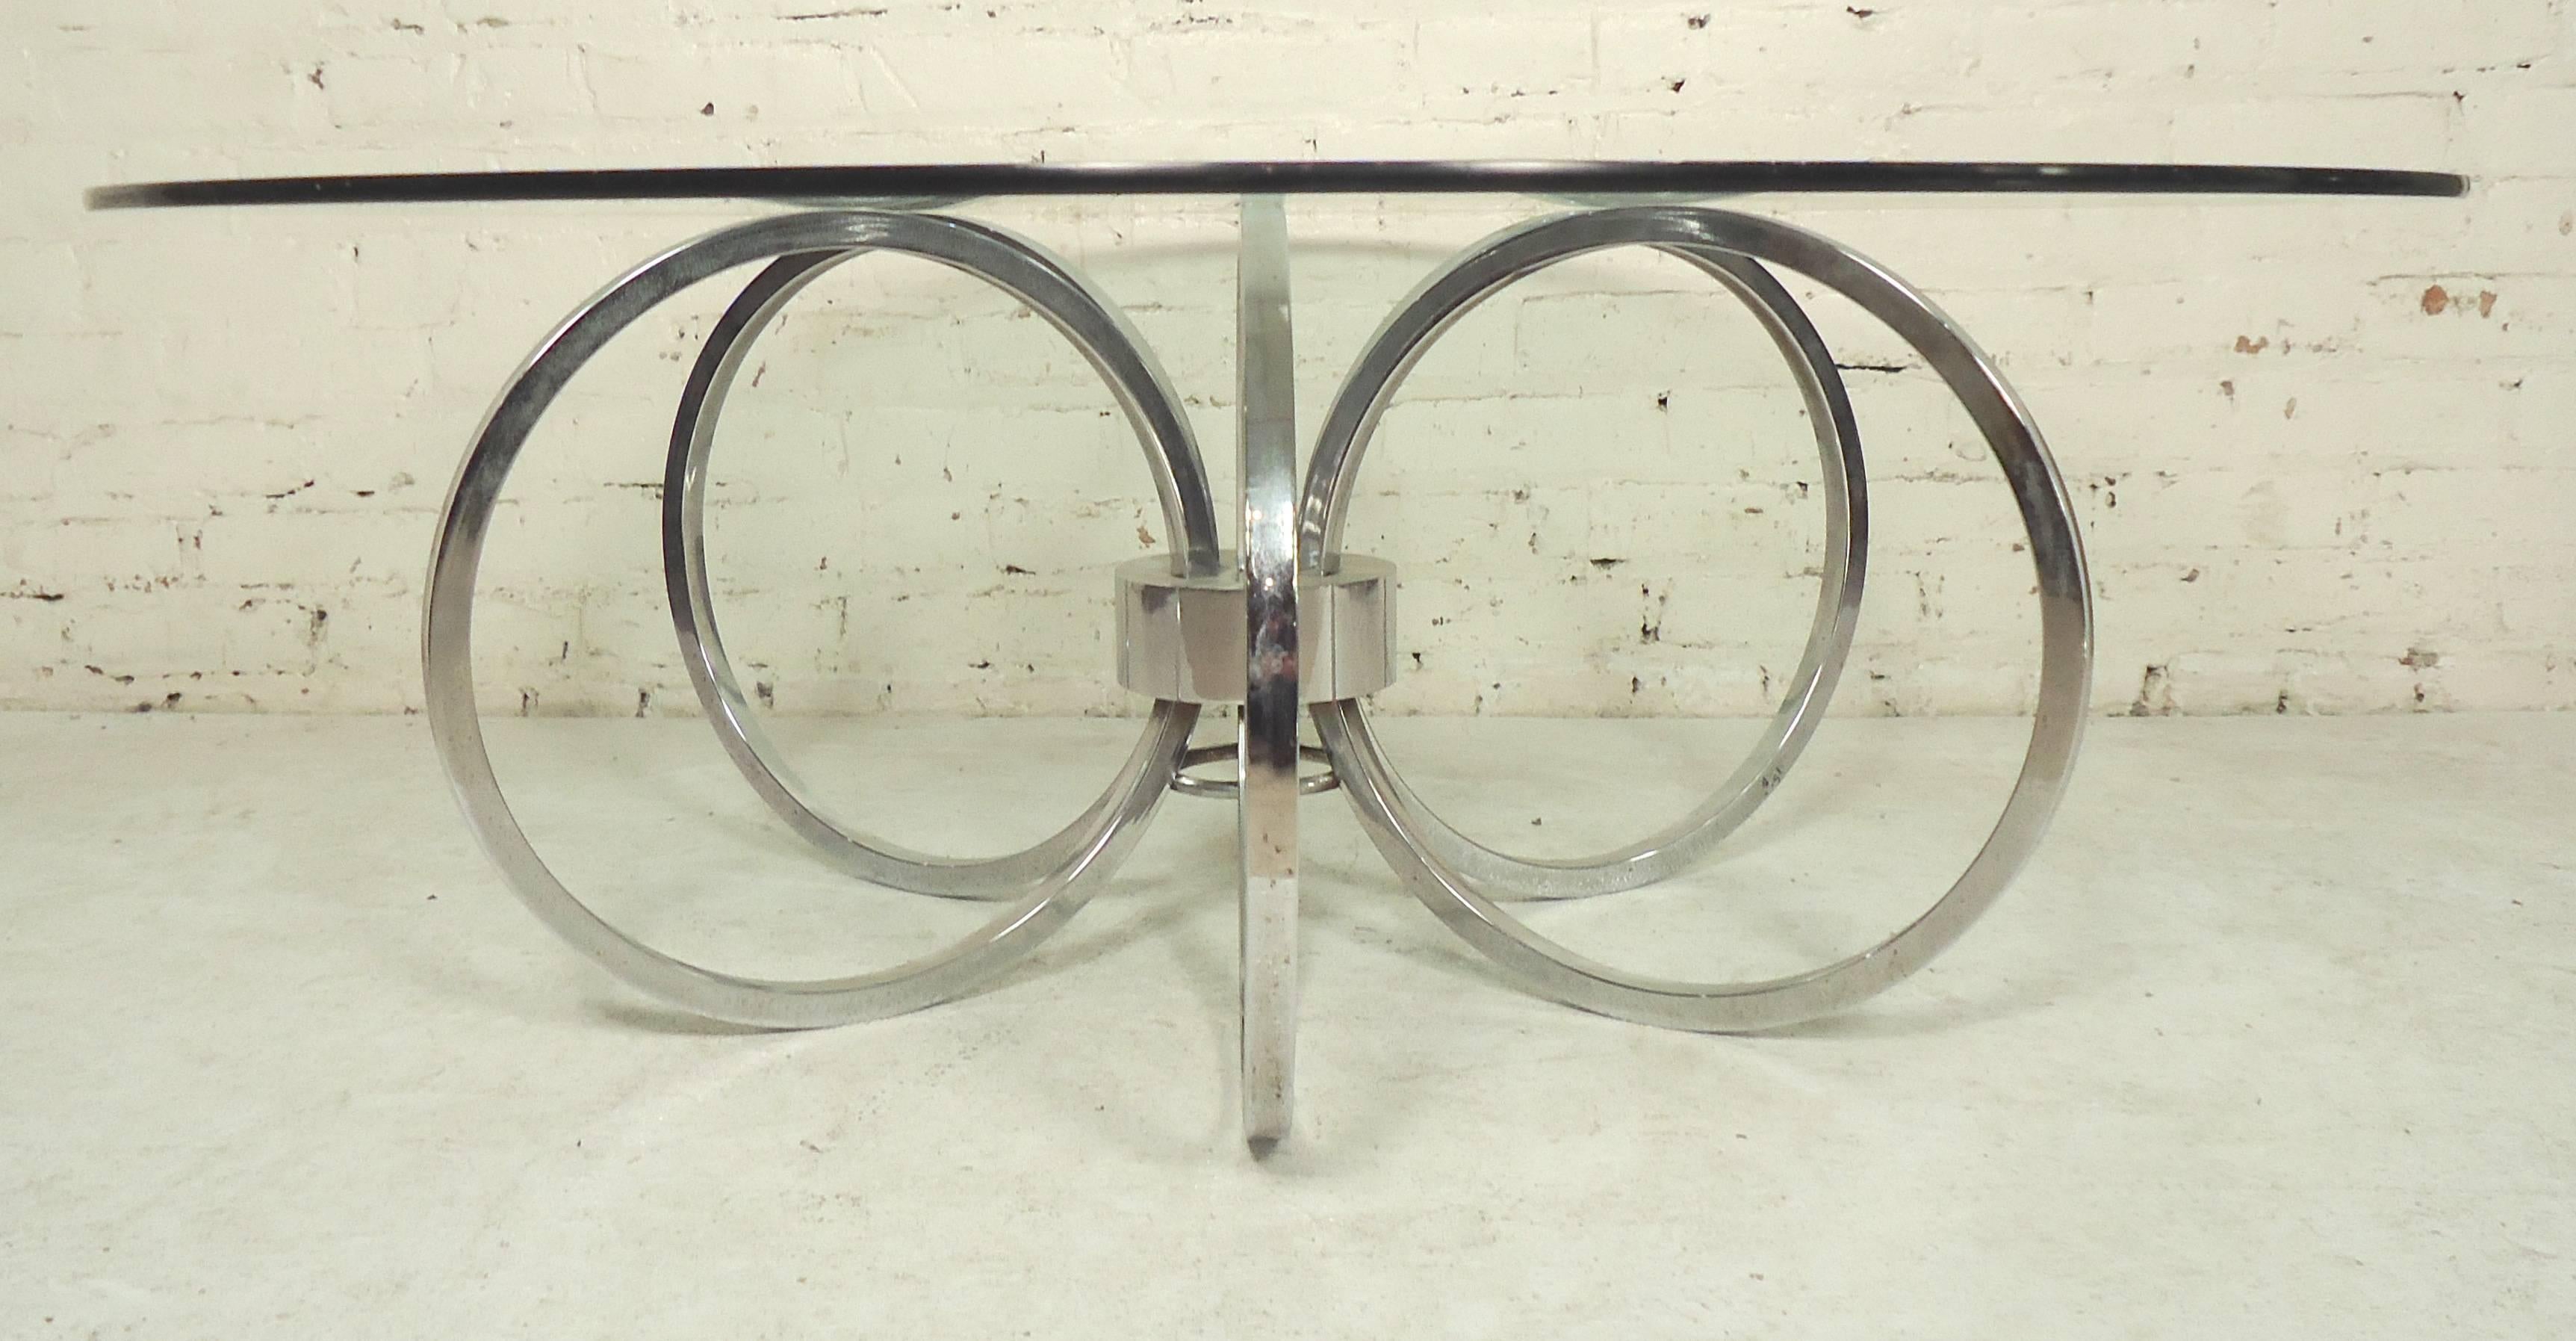 Round glass top coffee table with polished base made of chrome rings.

(Please confirm item location - NY or NJ - with dealer).
 